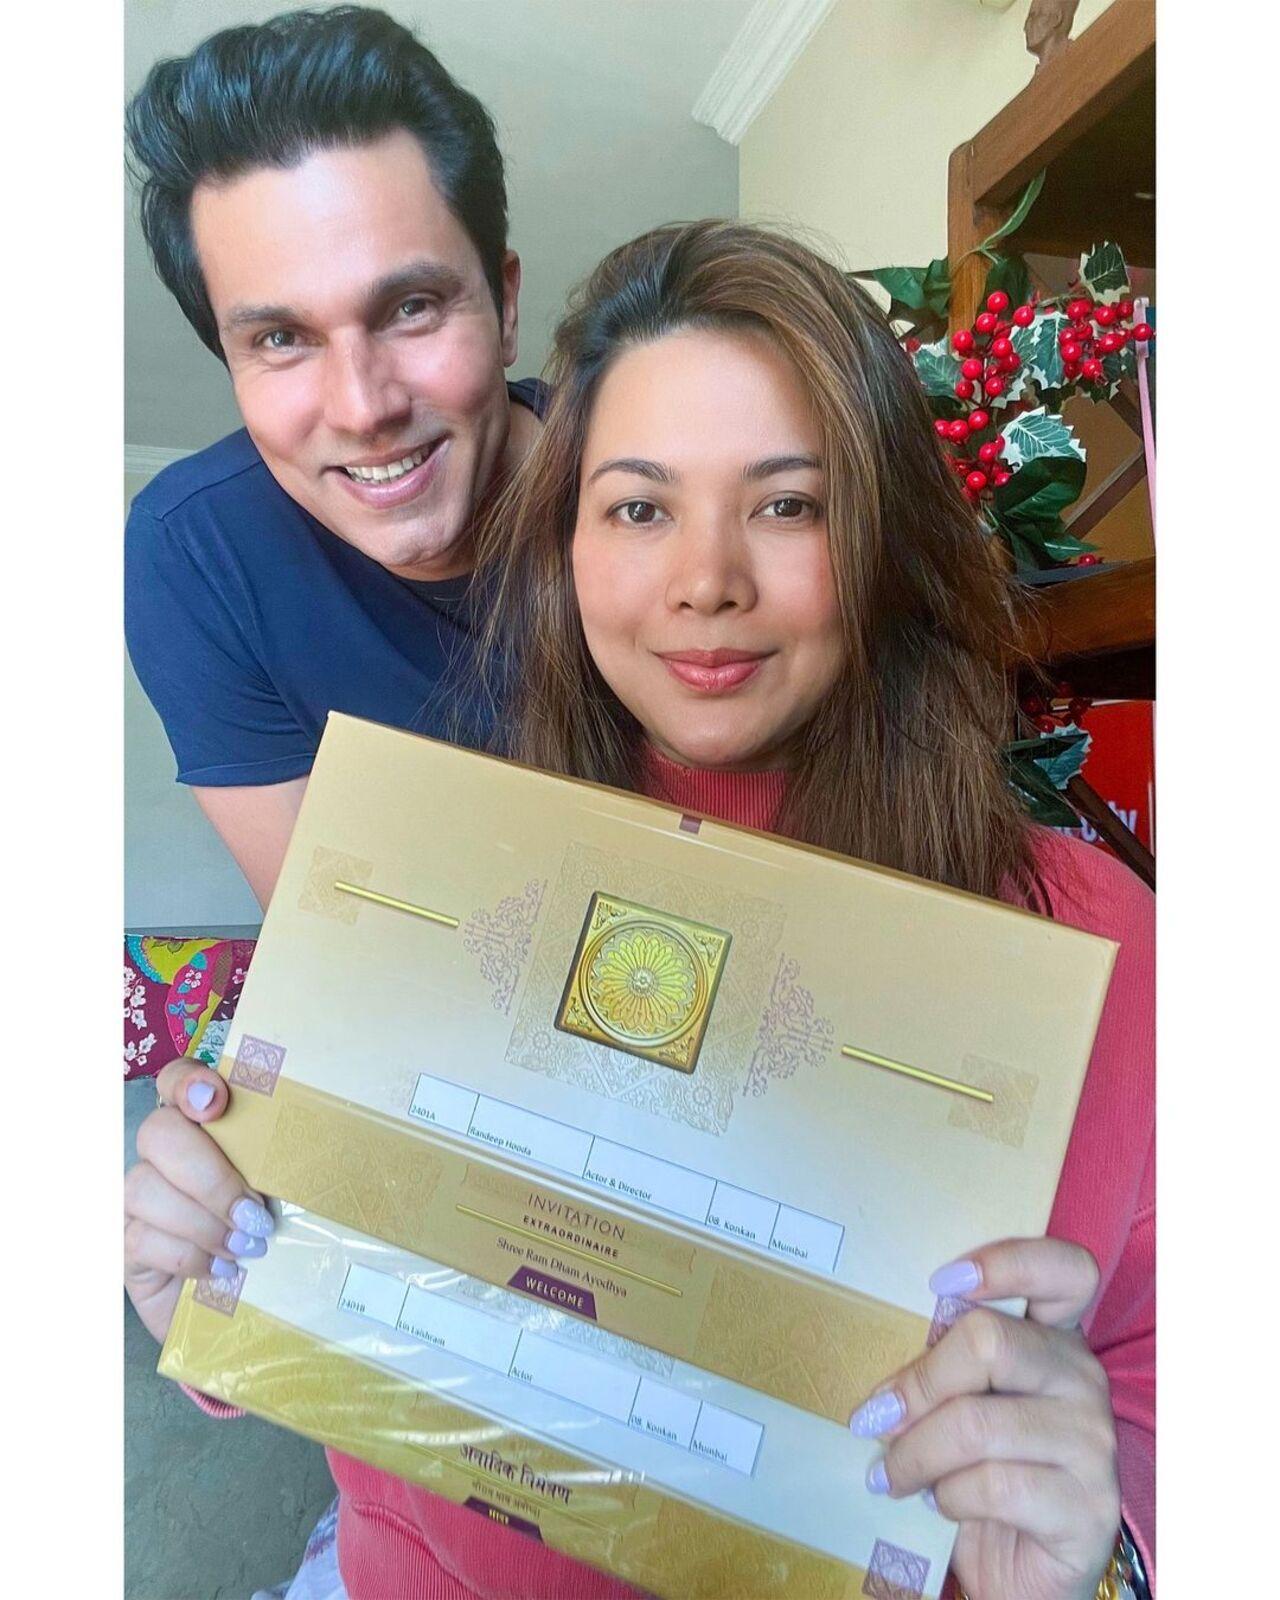 Newlyweds Randeep Hooda and Lin Laishram took to social media and shared a picture of them flaunting the invitation to the Ram temple